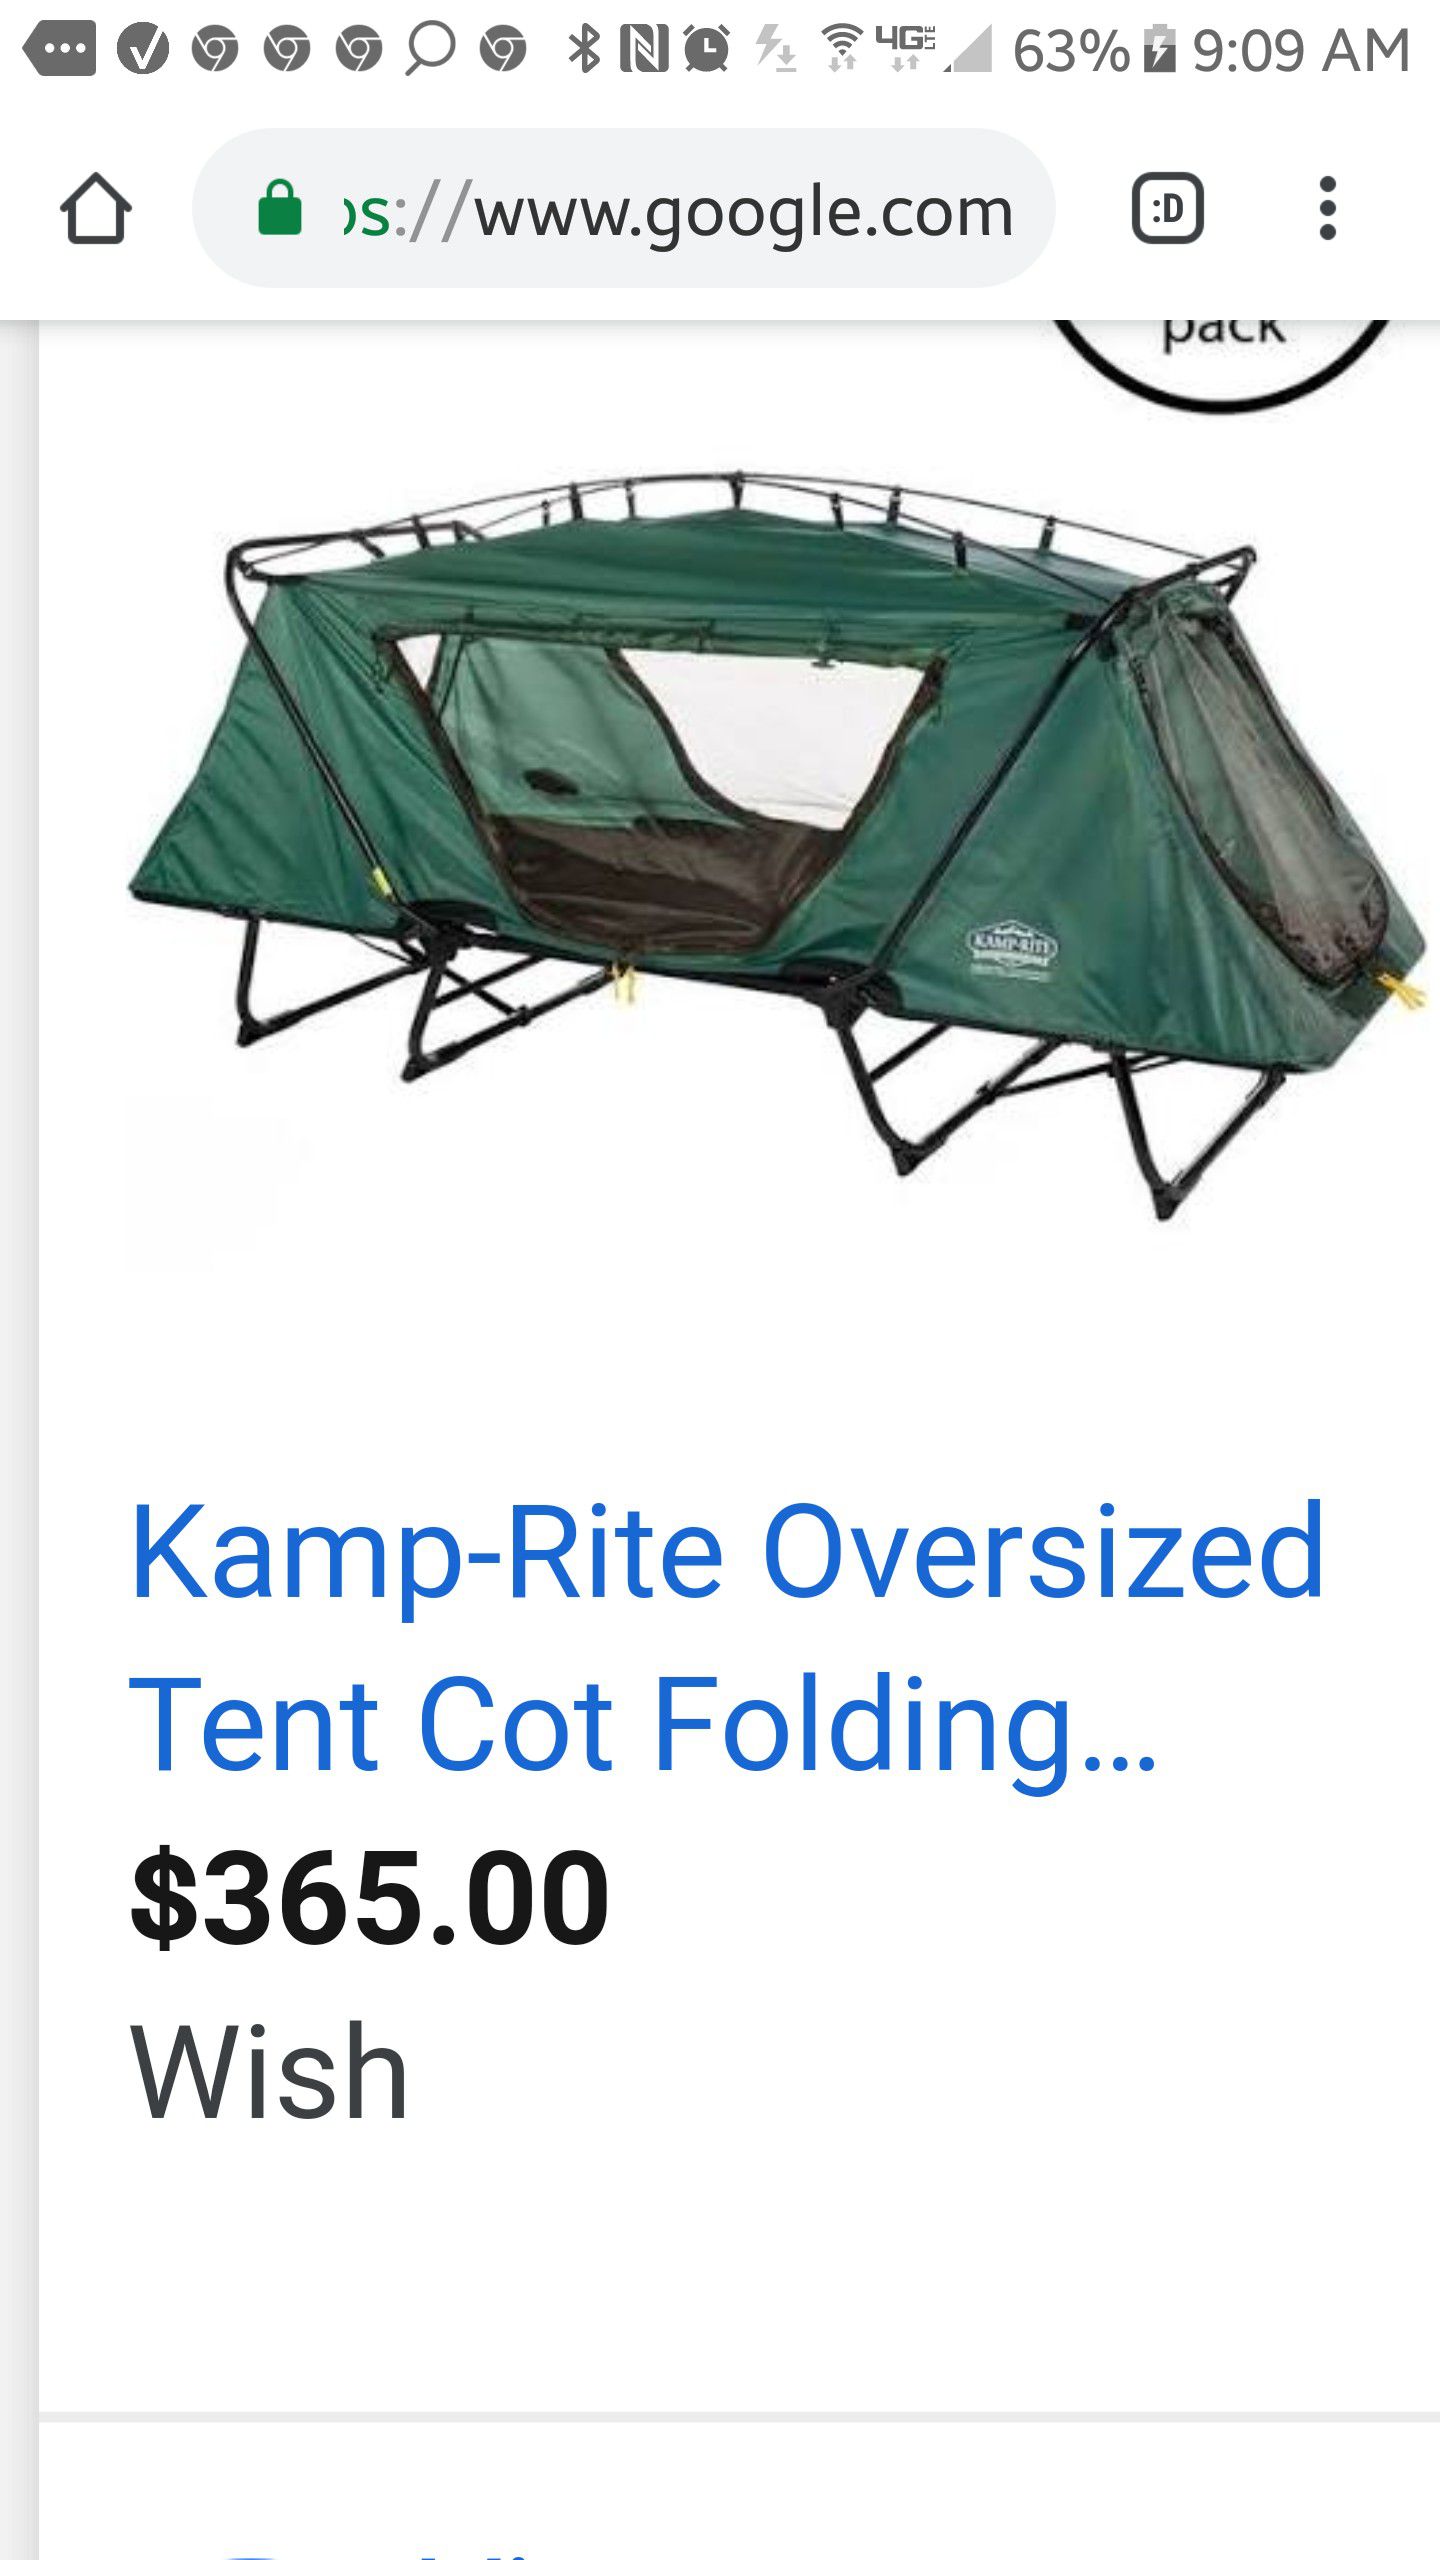 Camping Tent thats 2-person sleeping Cot too!- New